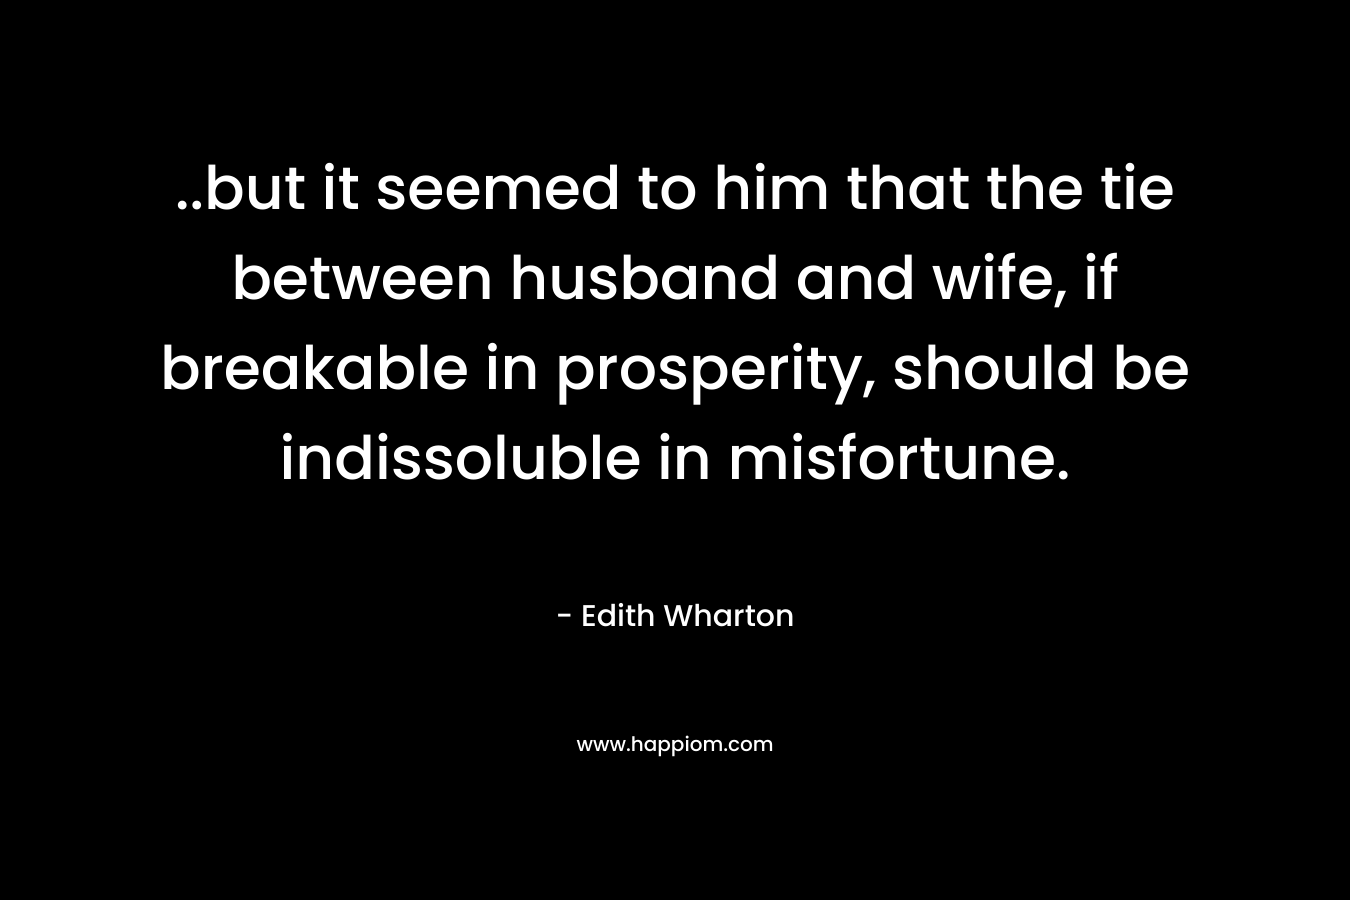 ..but it seemed to him that the tie between husband and wife, if breakable in prosperity, should be indissoluble in misfortune.